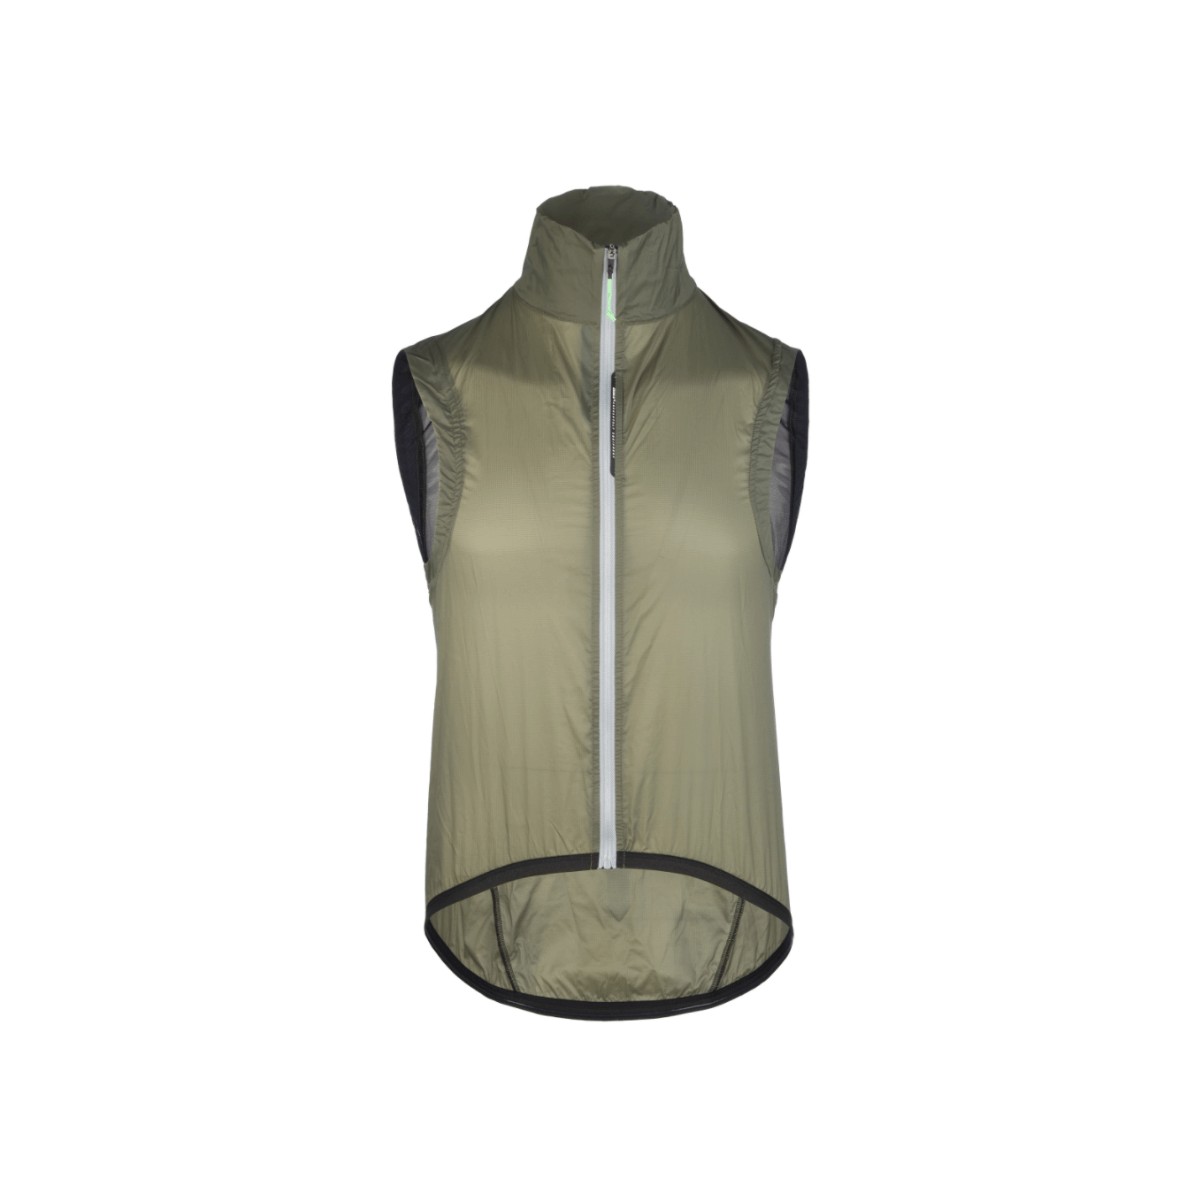 Gilet Air Q36.5 Vert olive, Taille M